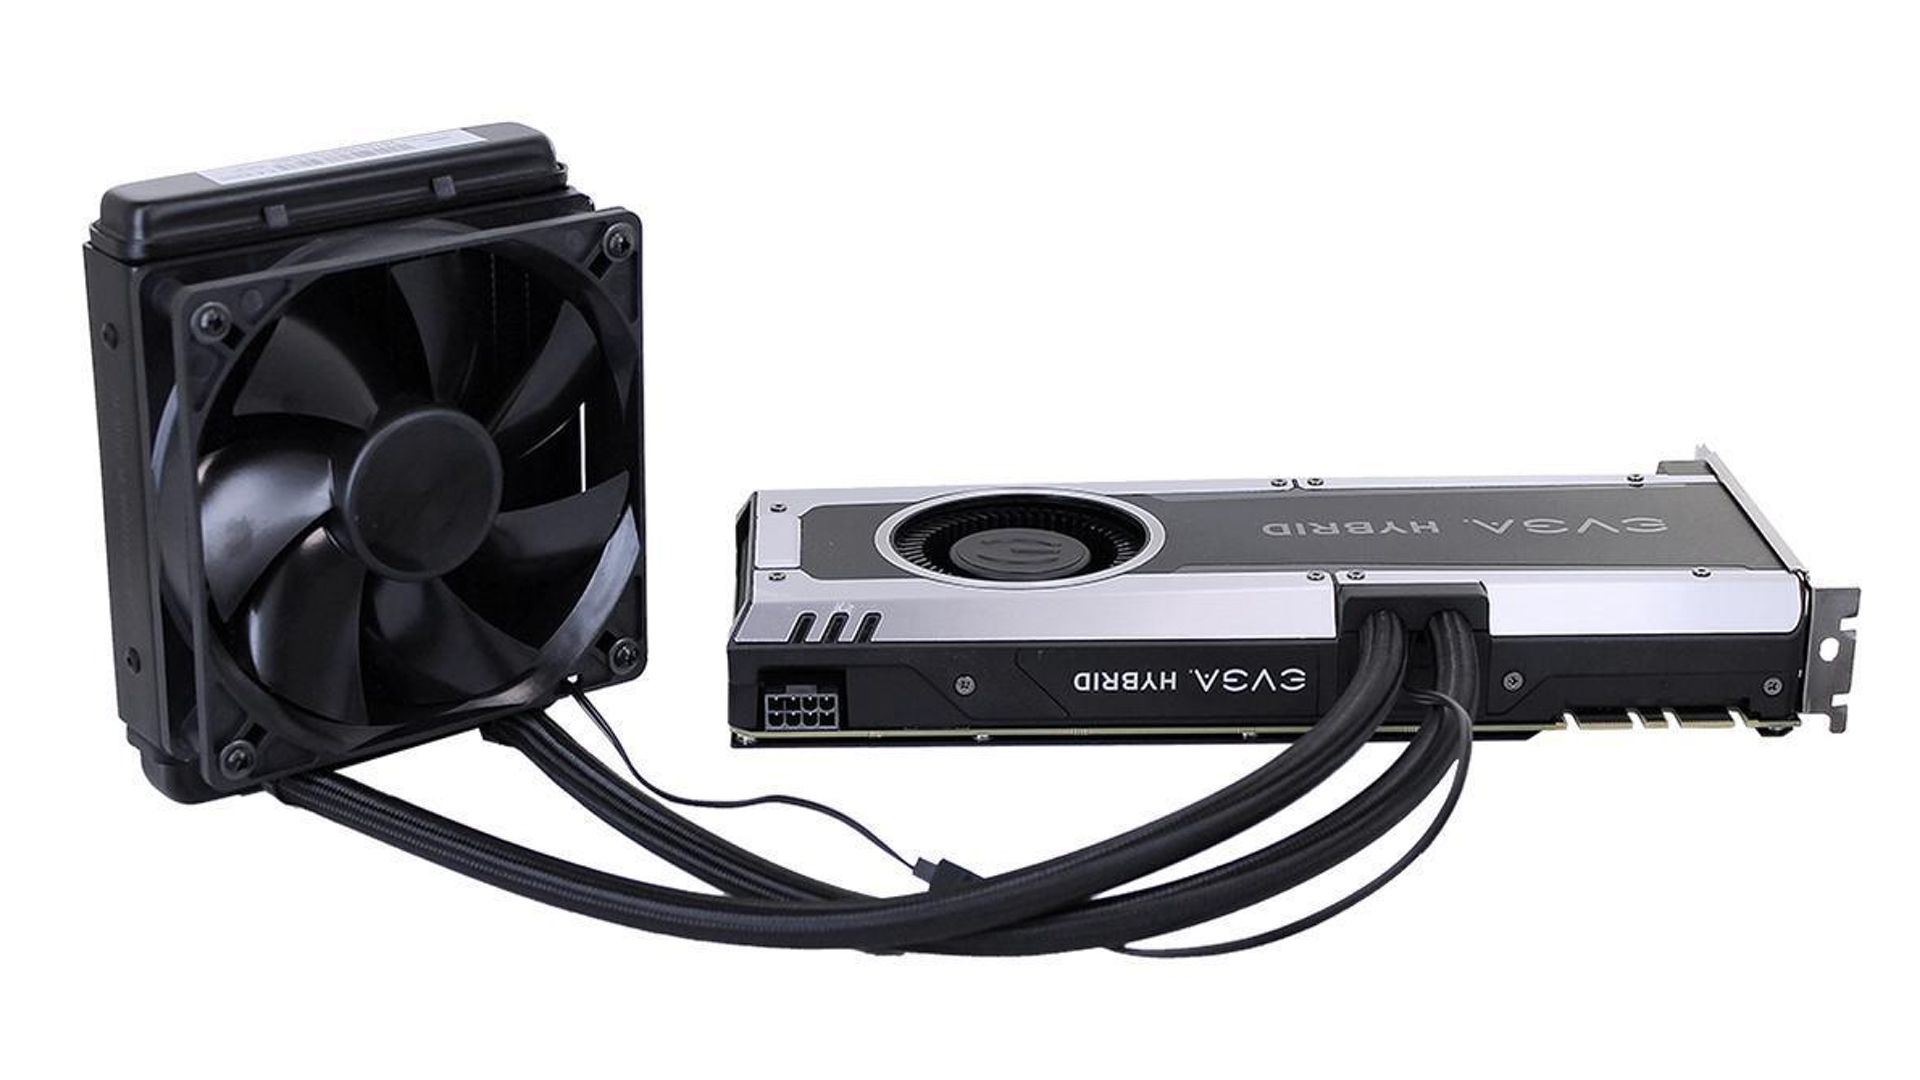 EVGA graphics card on white background